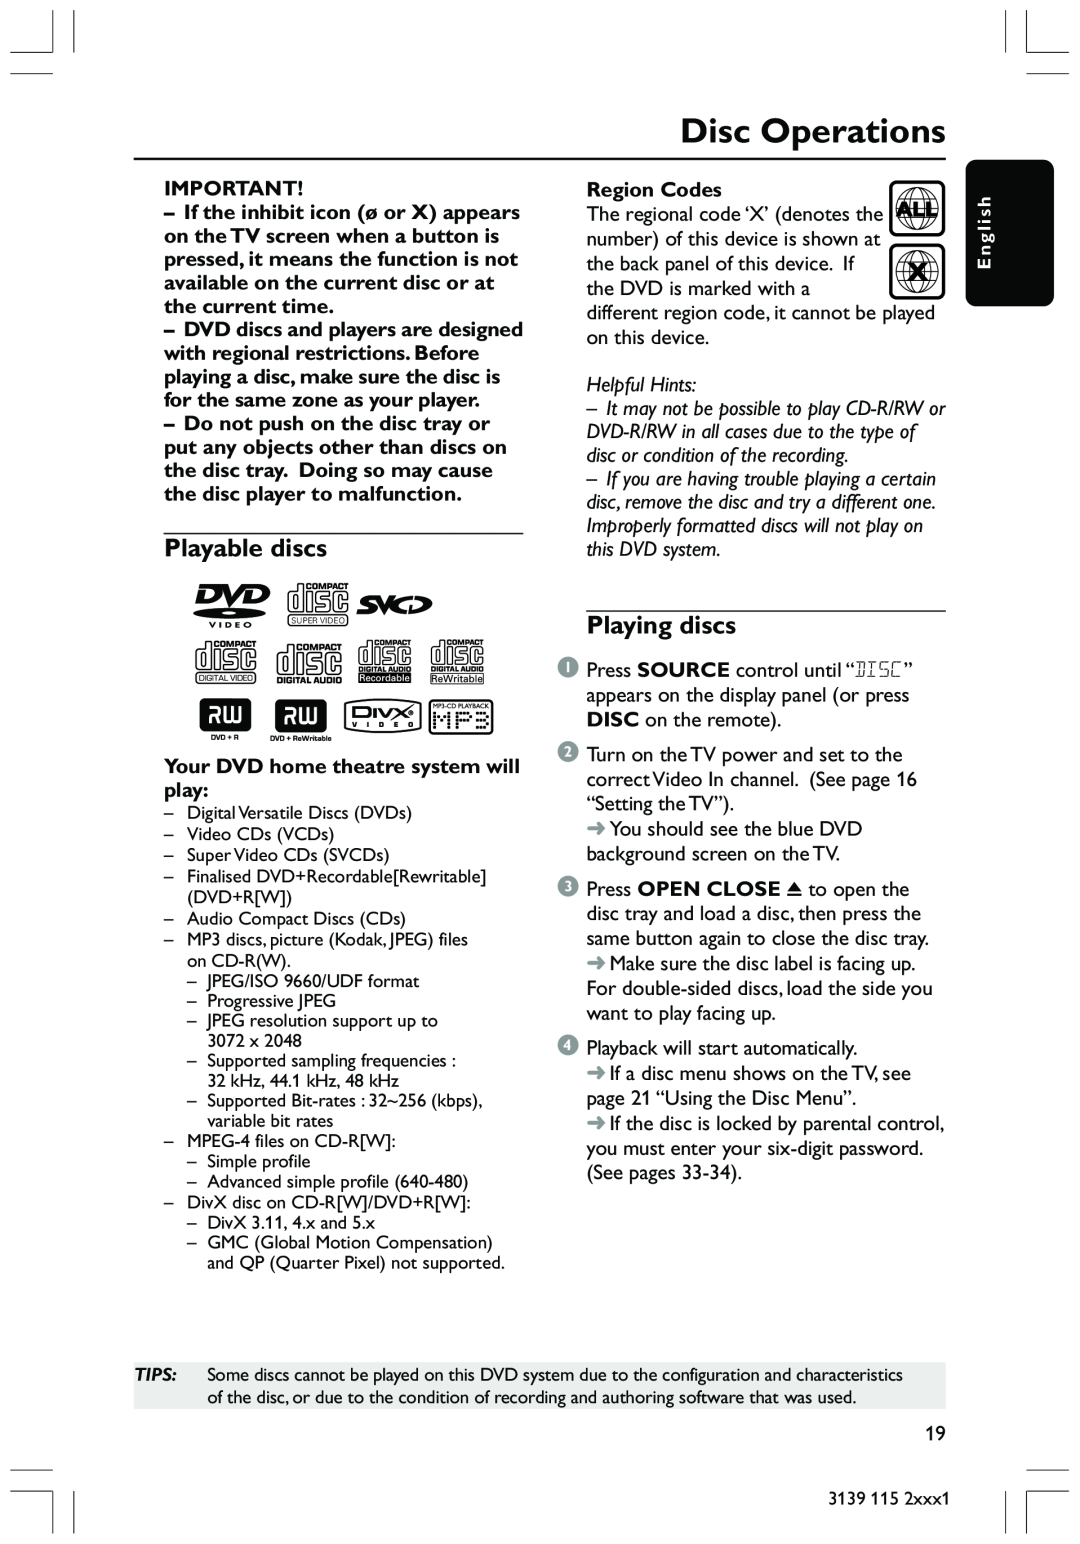 Philips HTS3300 user manual Disc Operations, Playable discs, Playing discs, Region Codes, Helpful Hints 